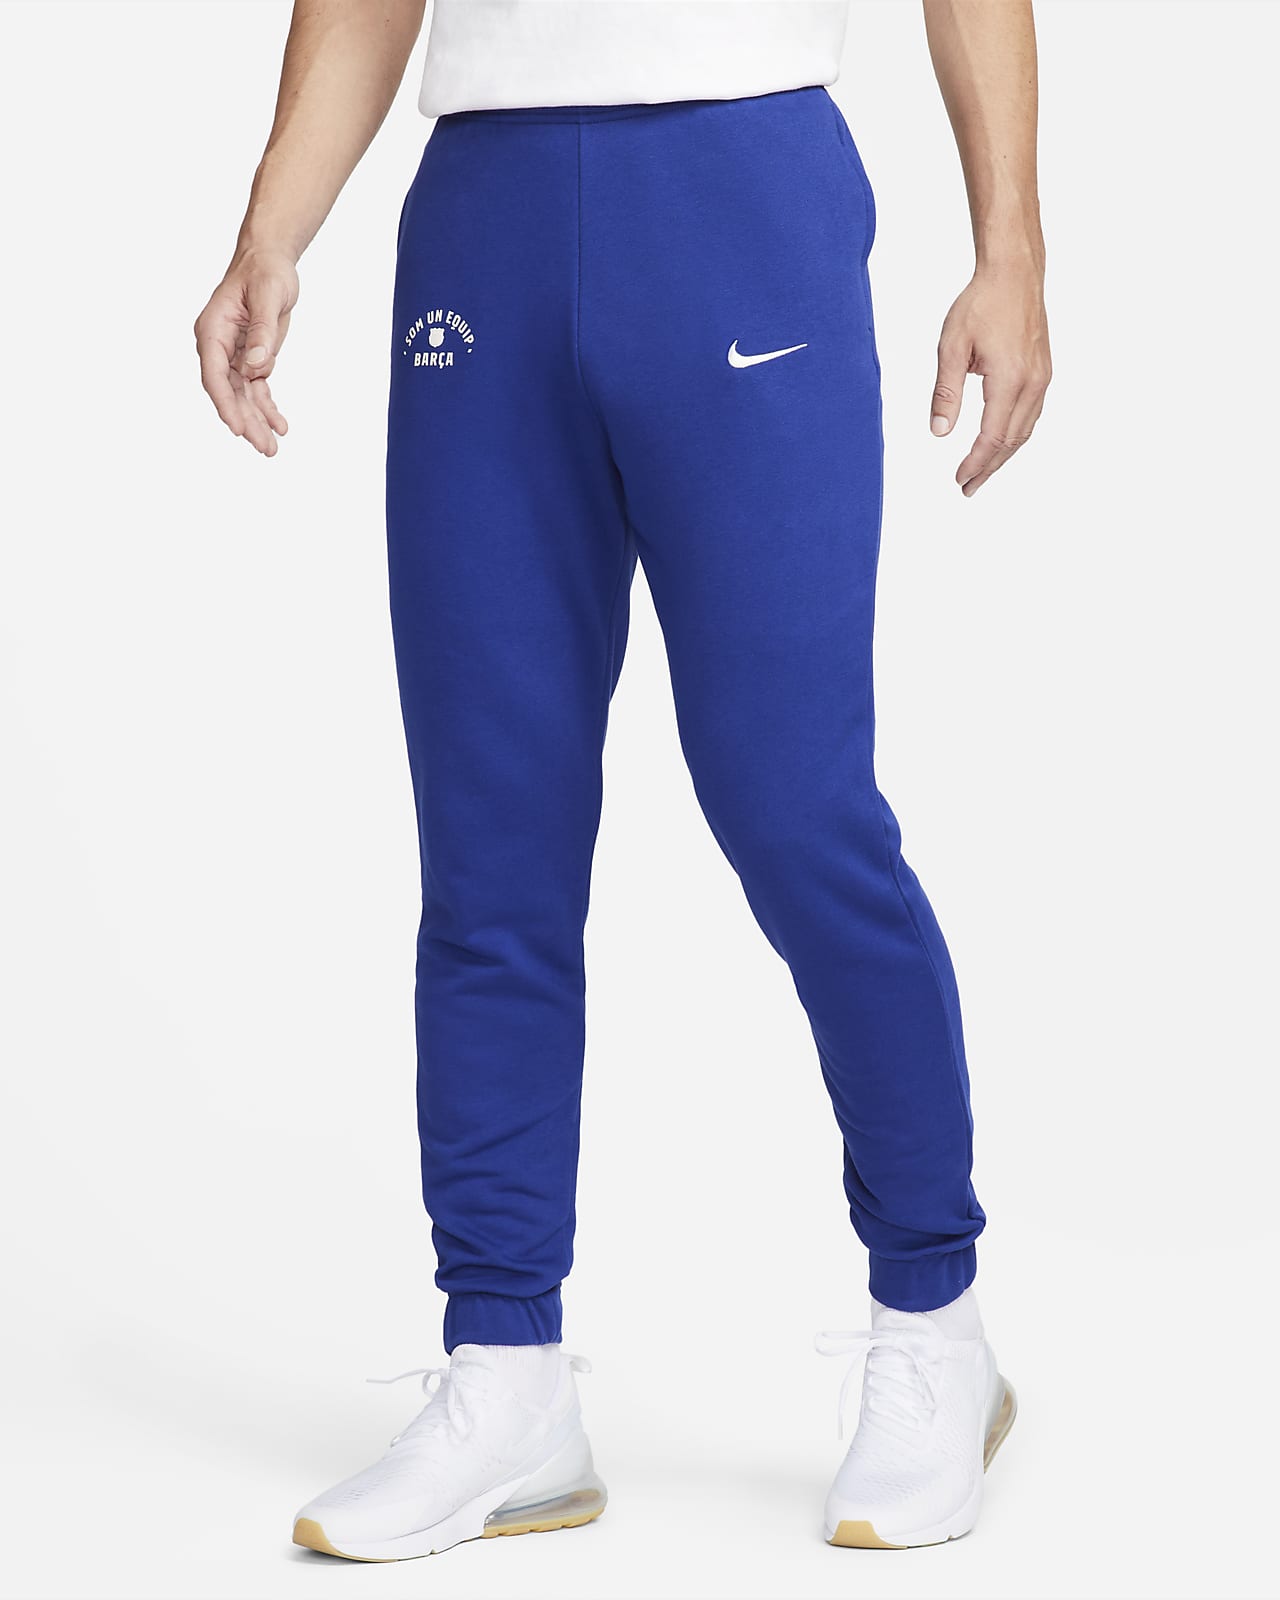 https://static.nike.com/a/images/t_PDP_1280_v1/f_auto,q_auto:eco/5ad80977-cfcf-40dc-ad04-98010df06e6c/fc-barcelona-mens-french-terry-pants-m3v4TH.png